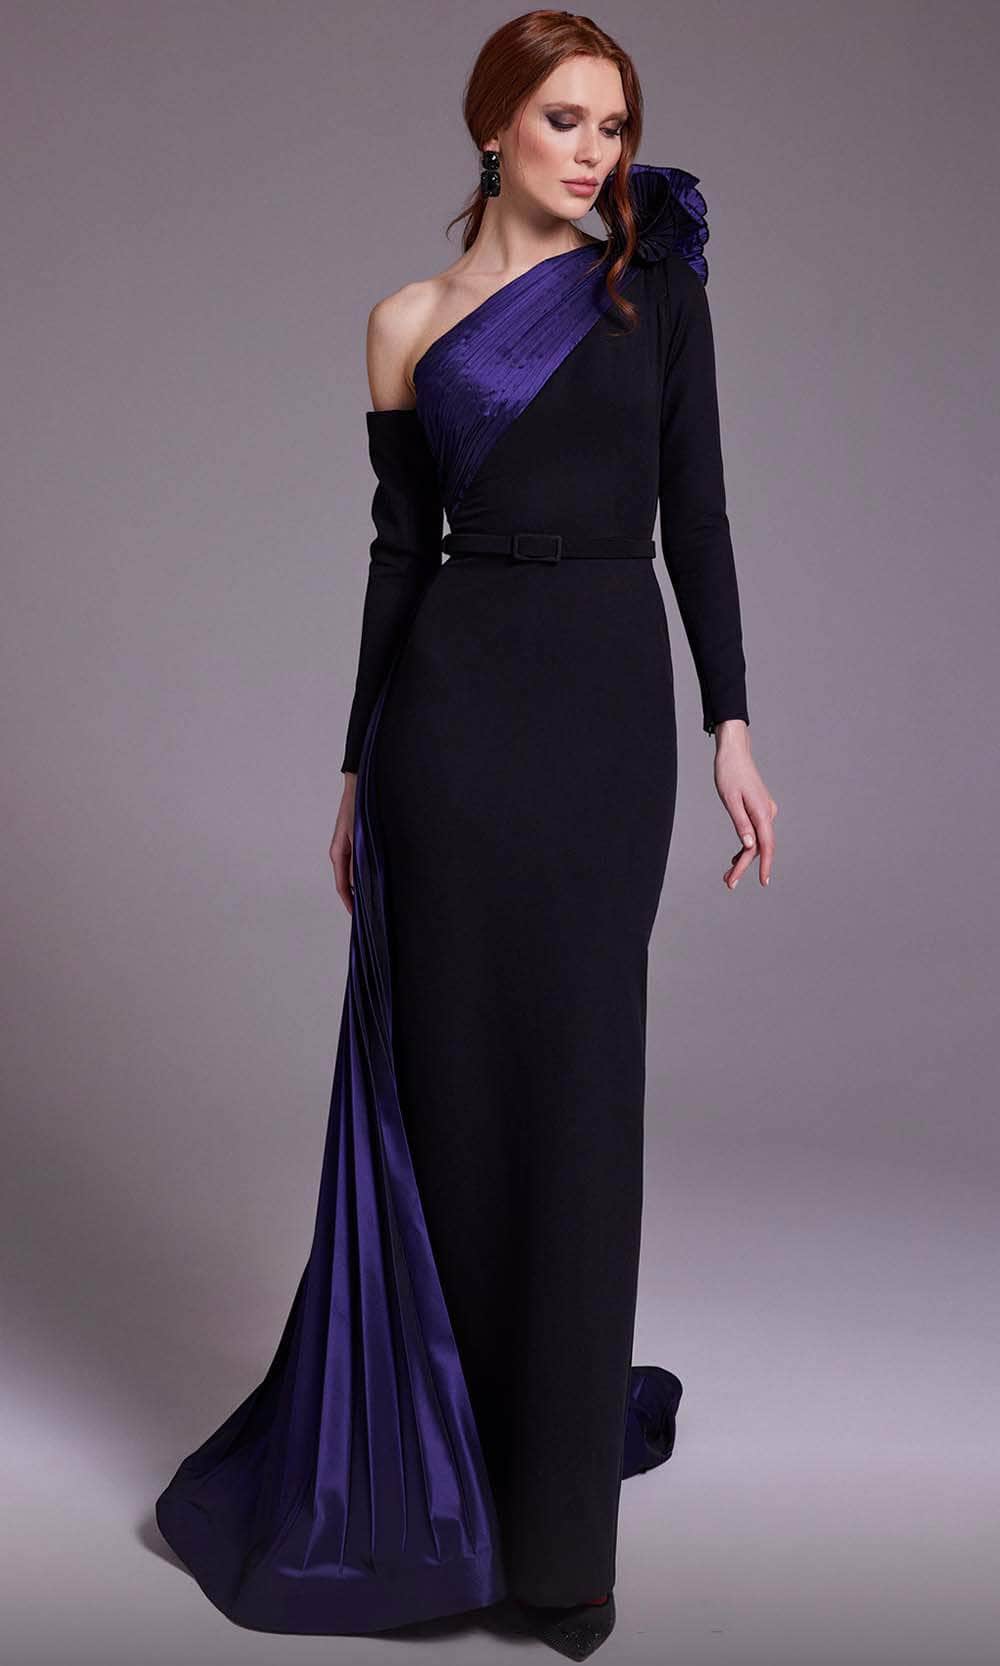 Image of MNM Couture N0529 - Contrast Sash Evening Dress